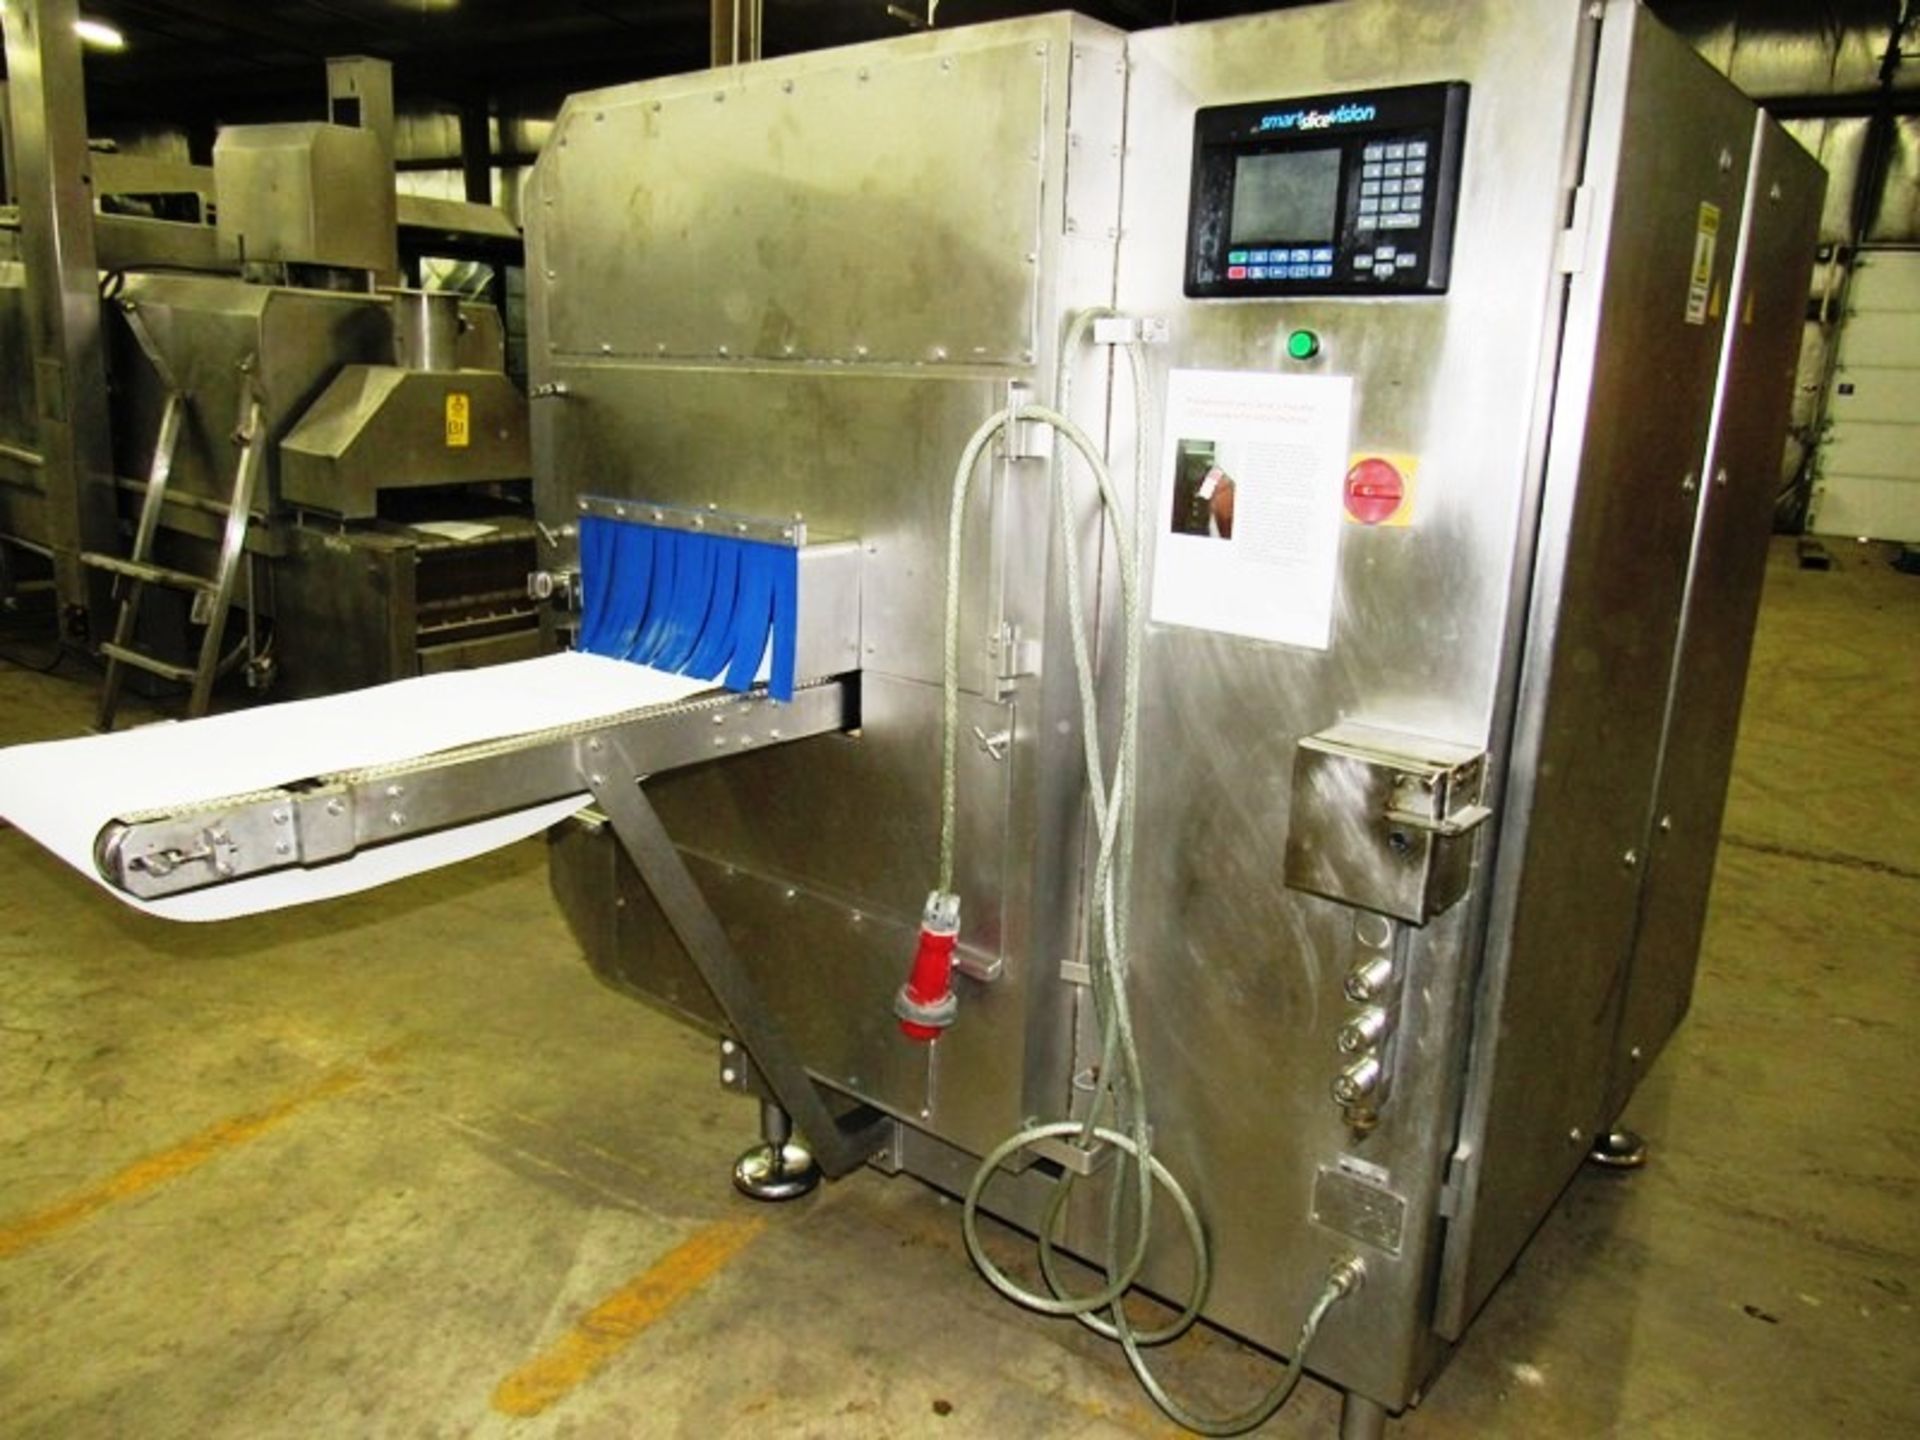 AEW Delford Mdl. SSV Vision Slicer for fresh, non frozen meats, equipped with (3) digital - Bild 11 aus 17